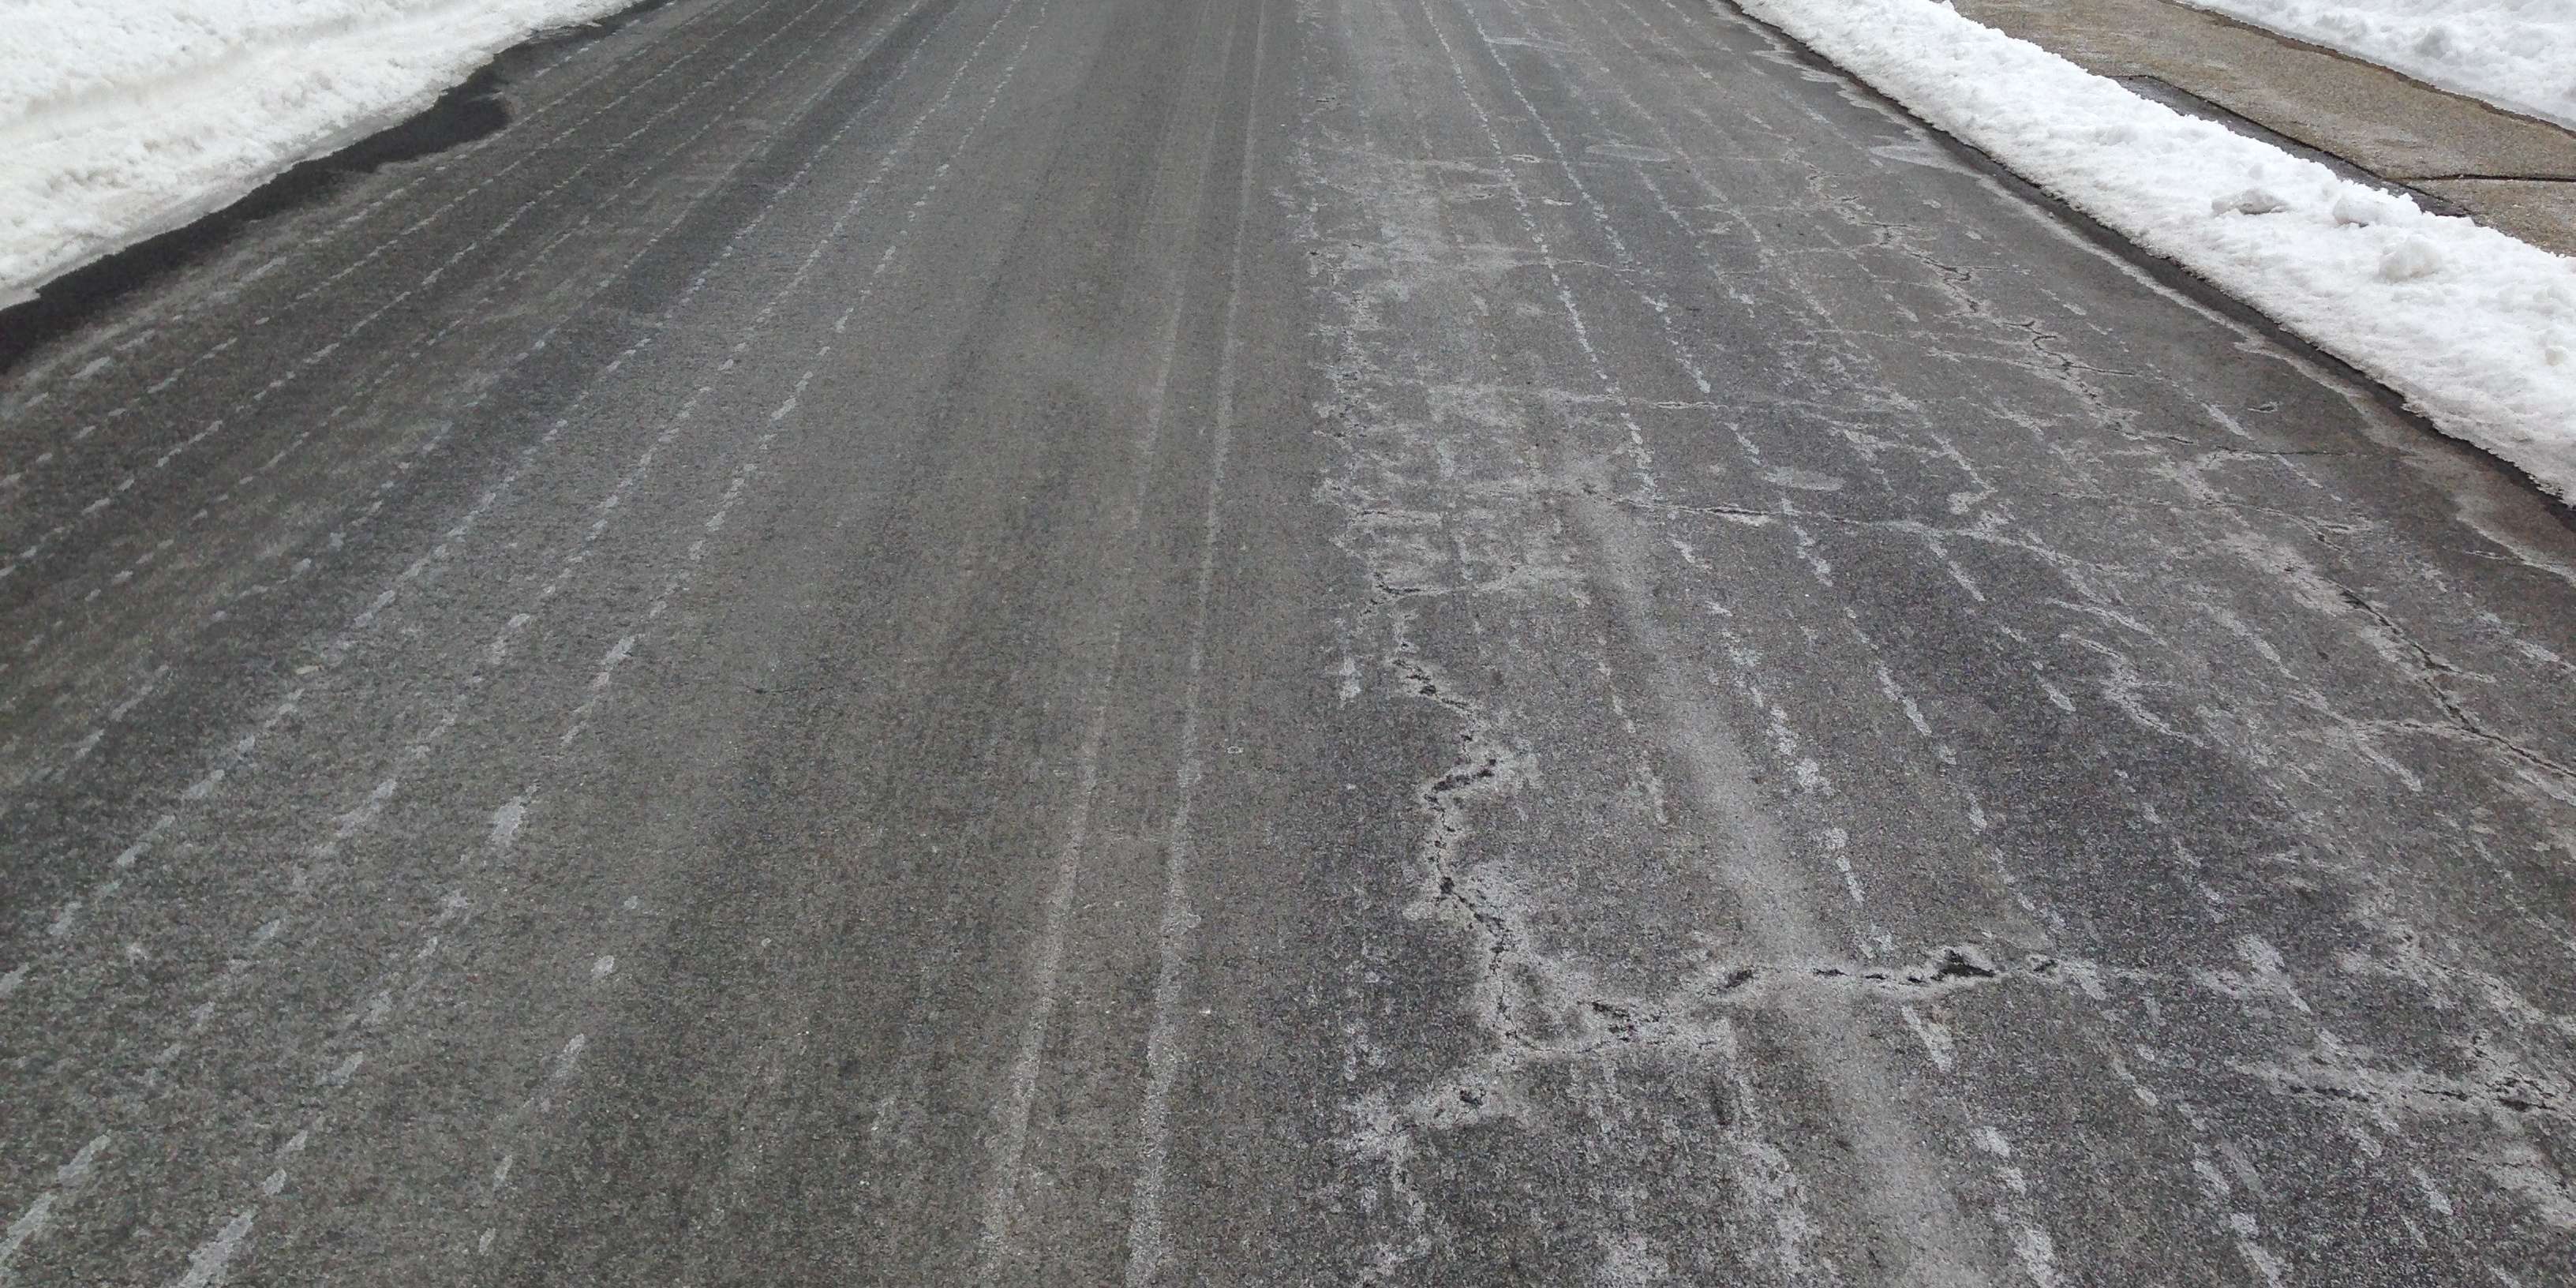 Salts Gone - Salt and brine are great on roads